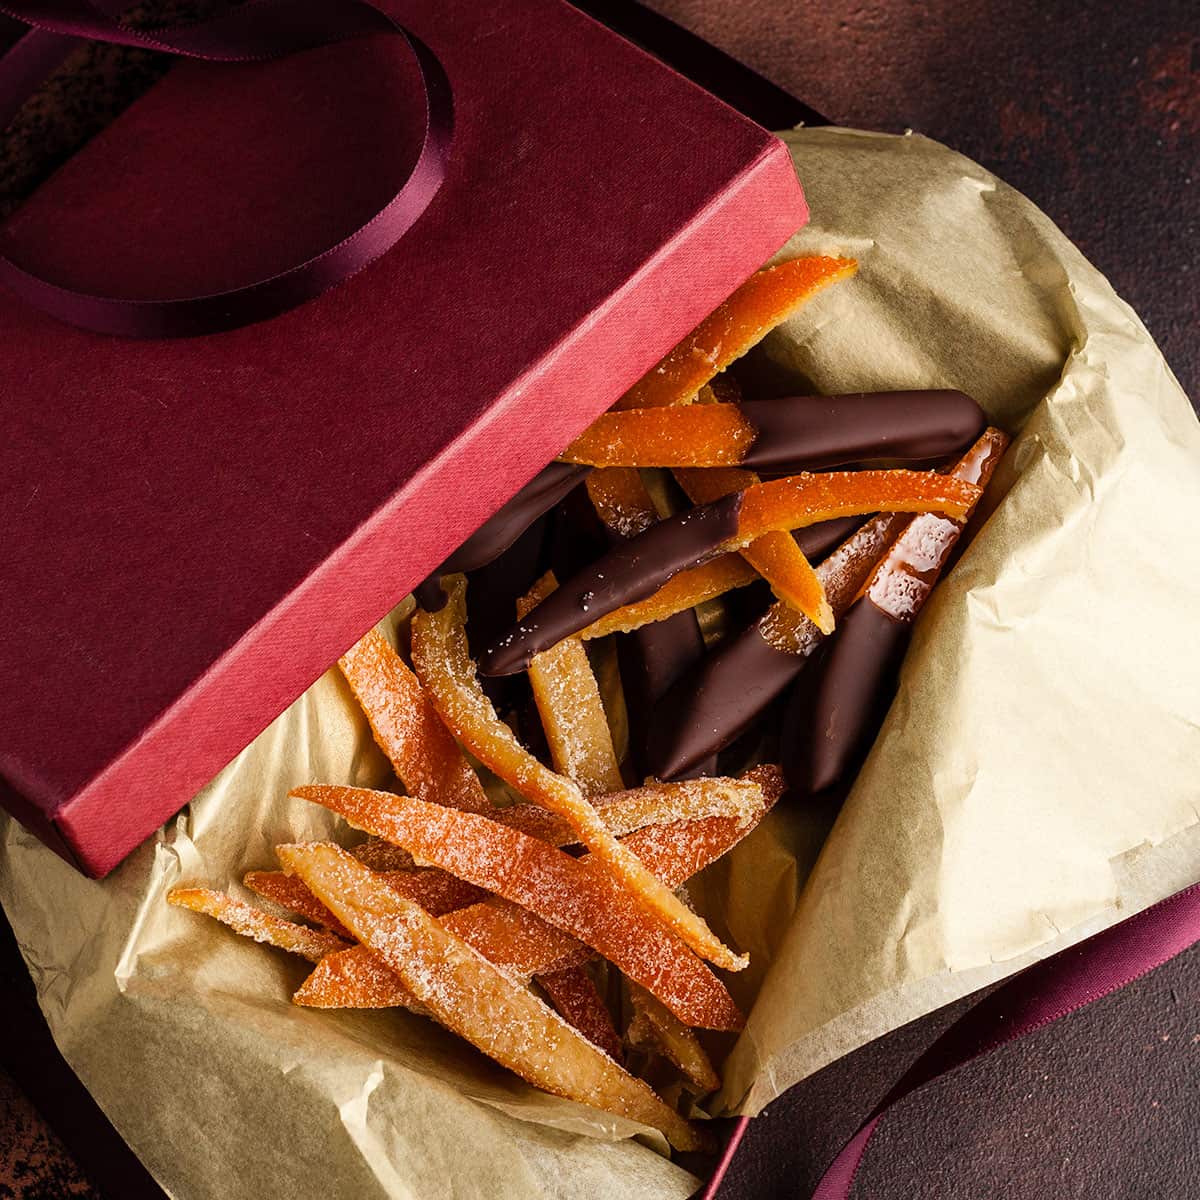 chocolate dipped and plain candied orange peel in a gift box.